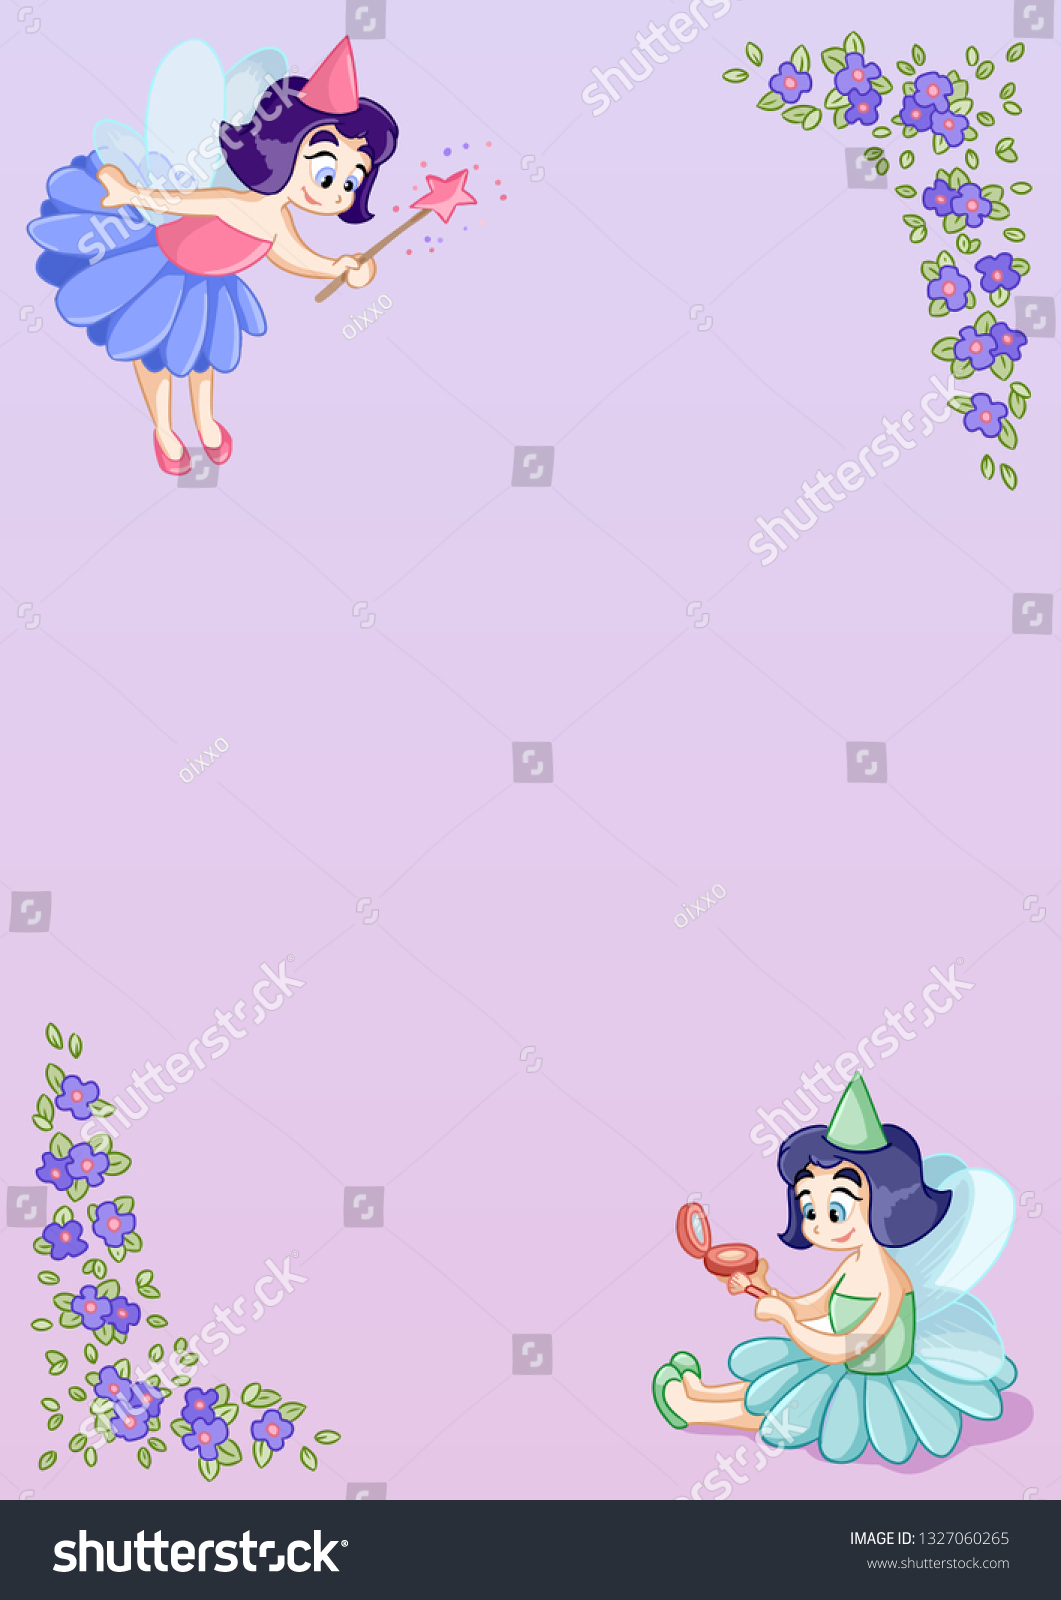 a4-letter-template-cute-little-fairy-stock-vector-royalty-free-1327060265